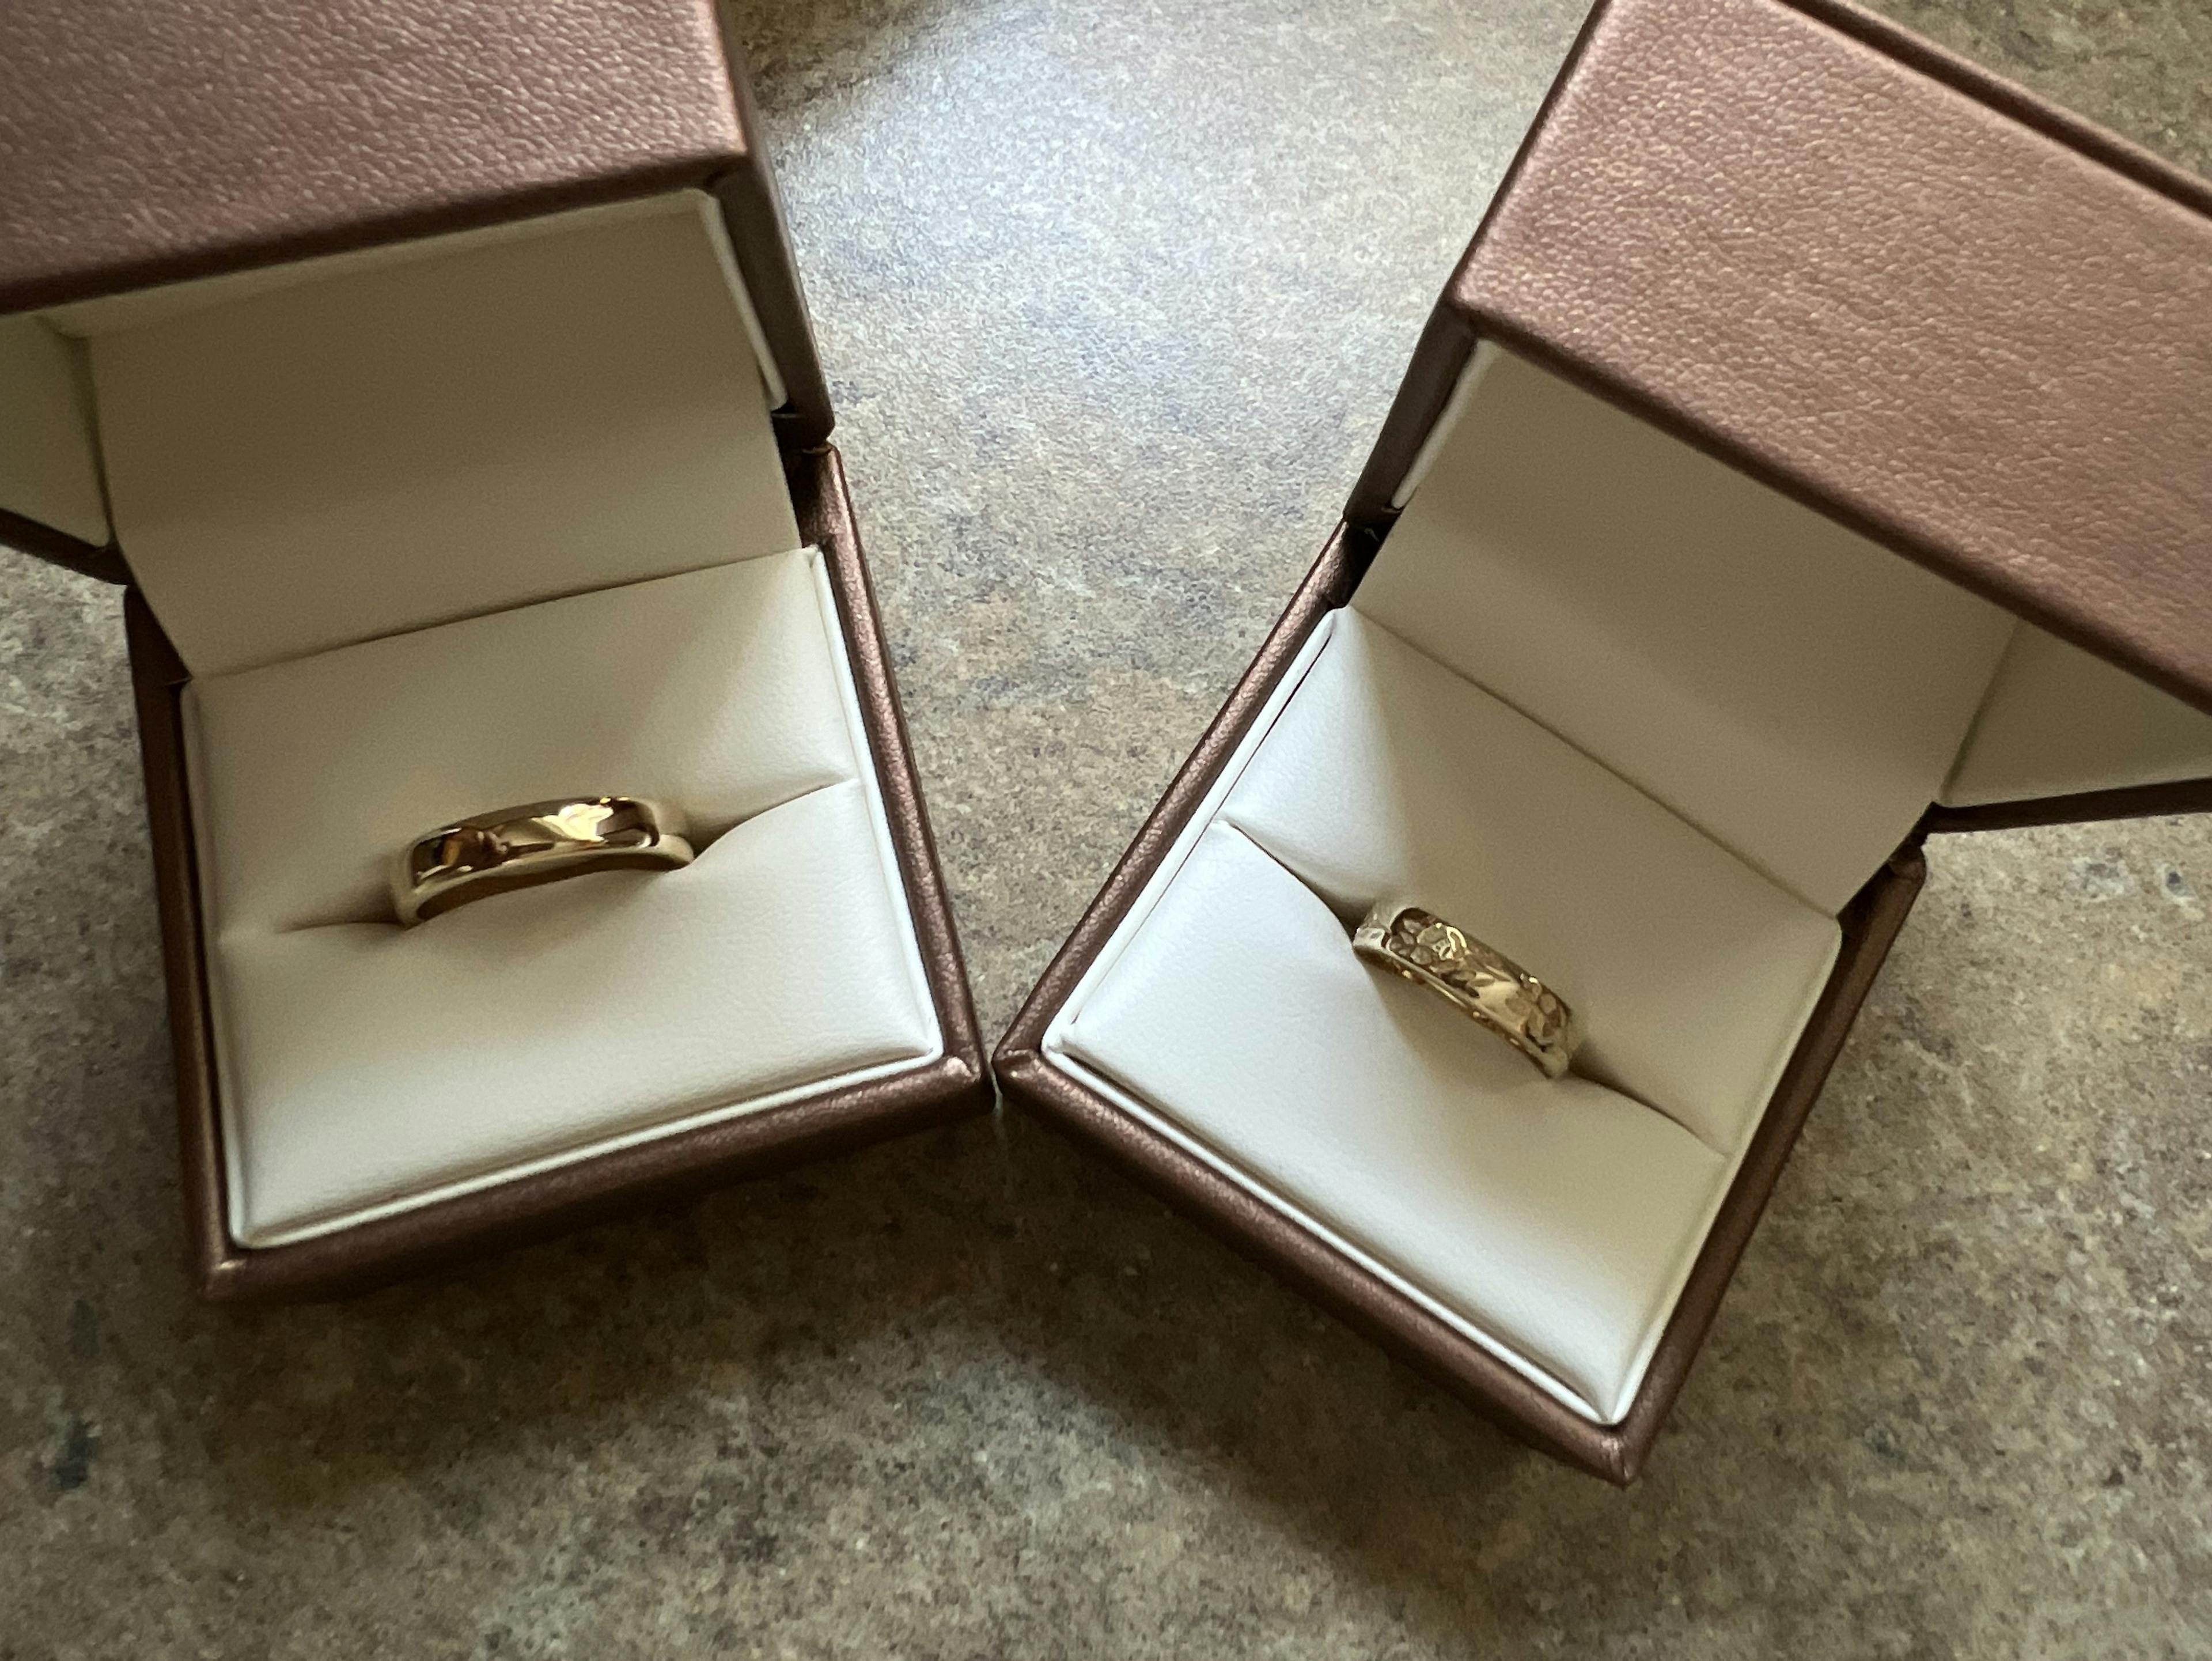 Two gold wedding rings in brown boxes.